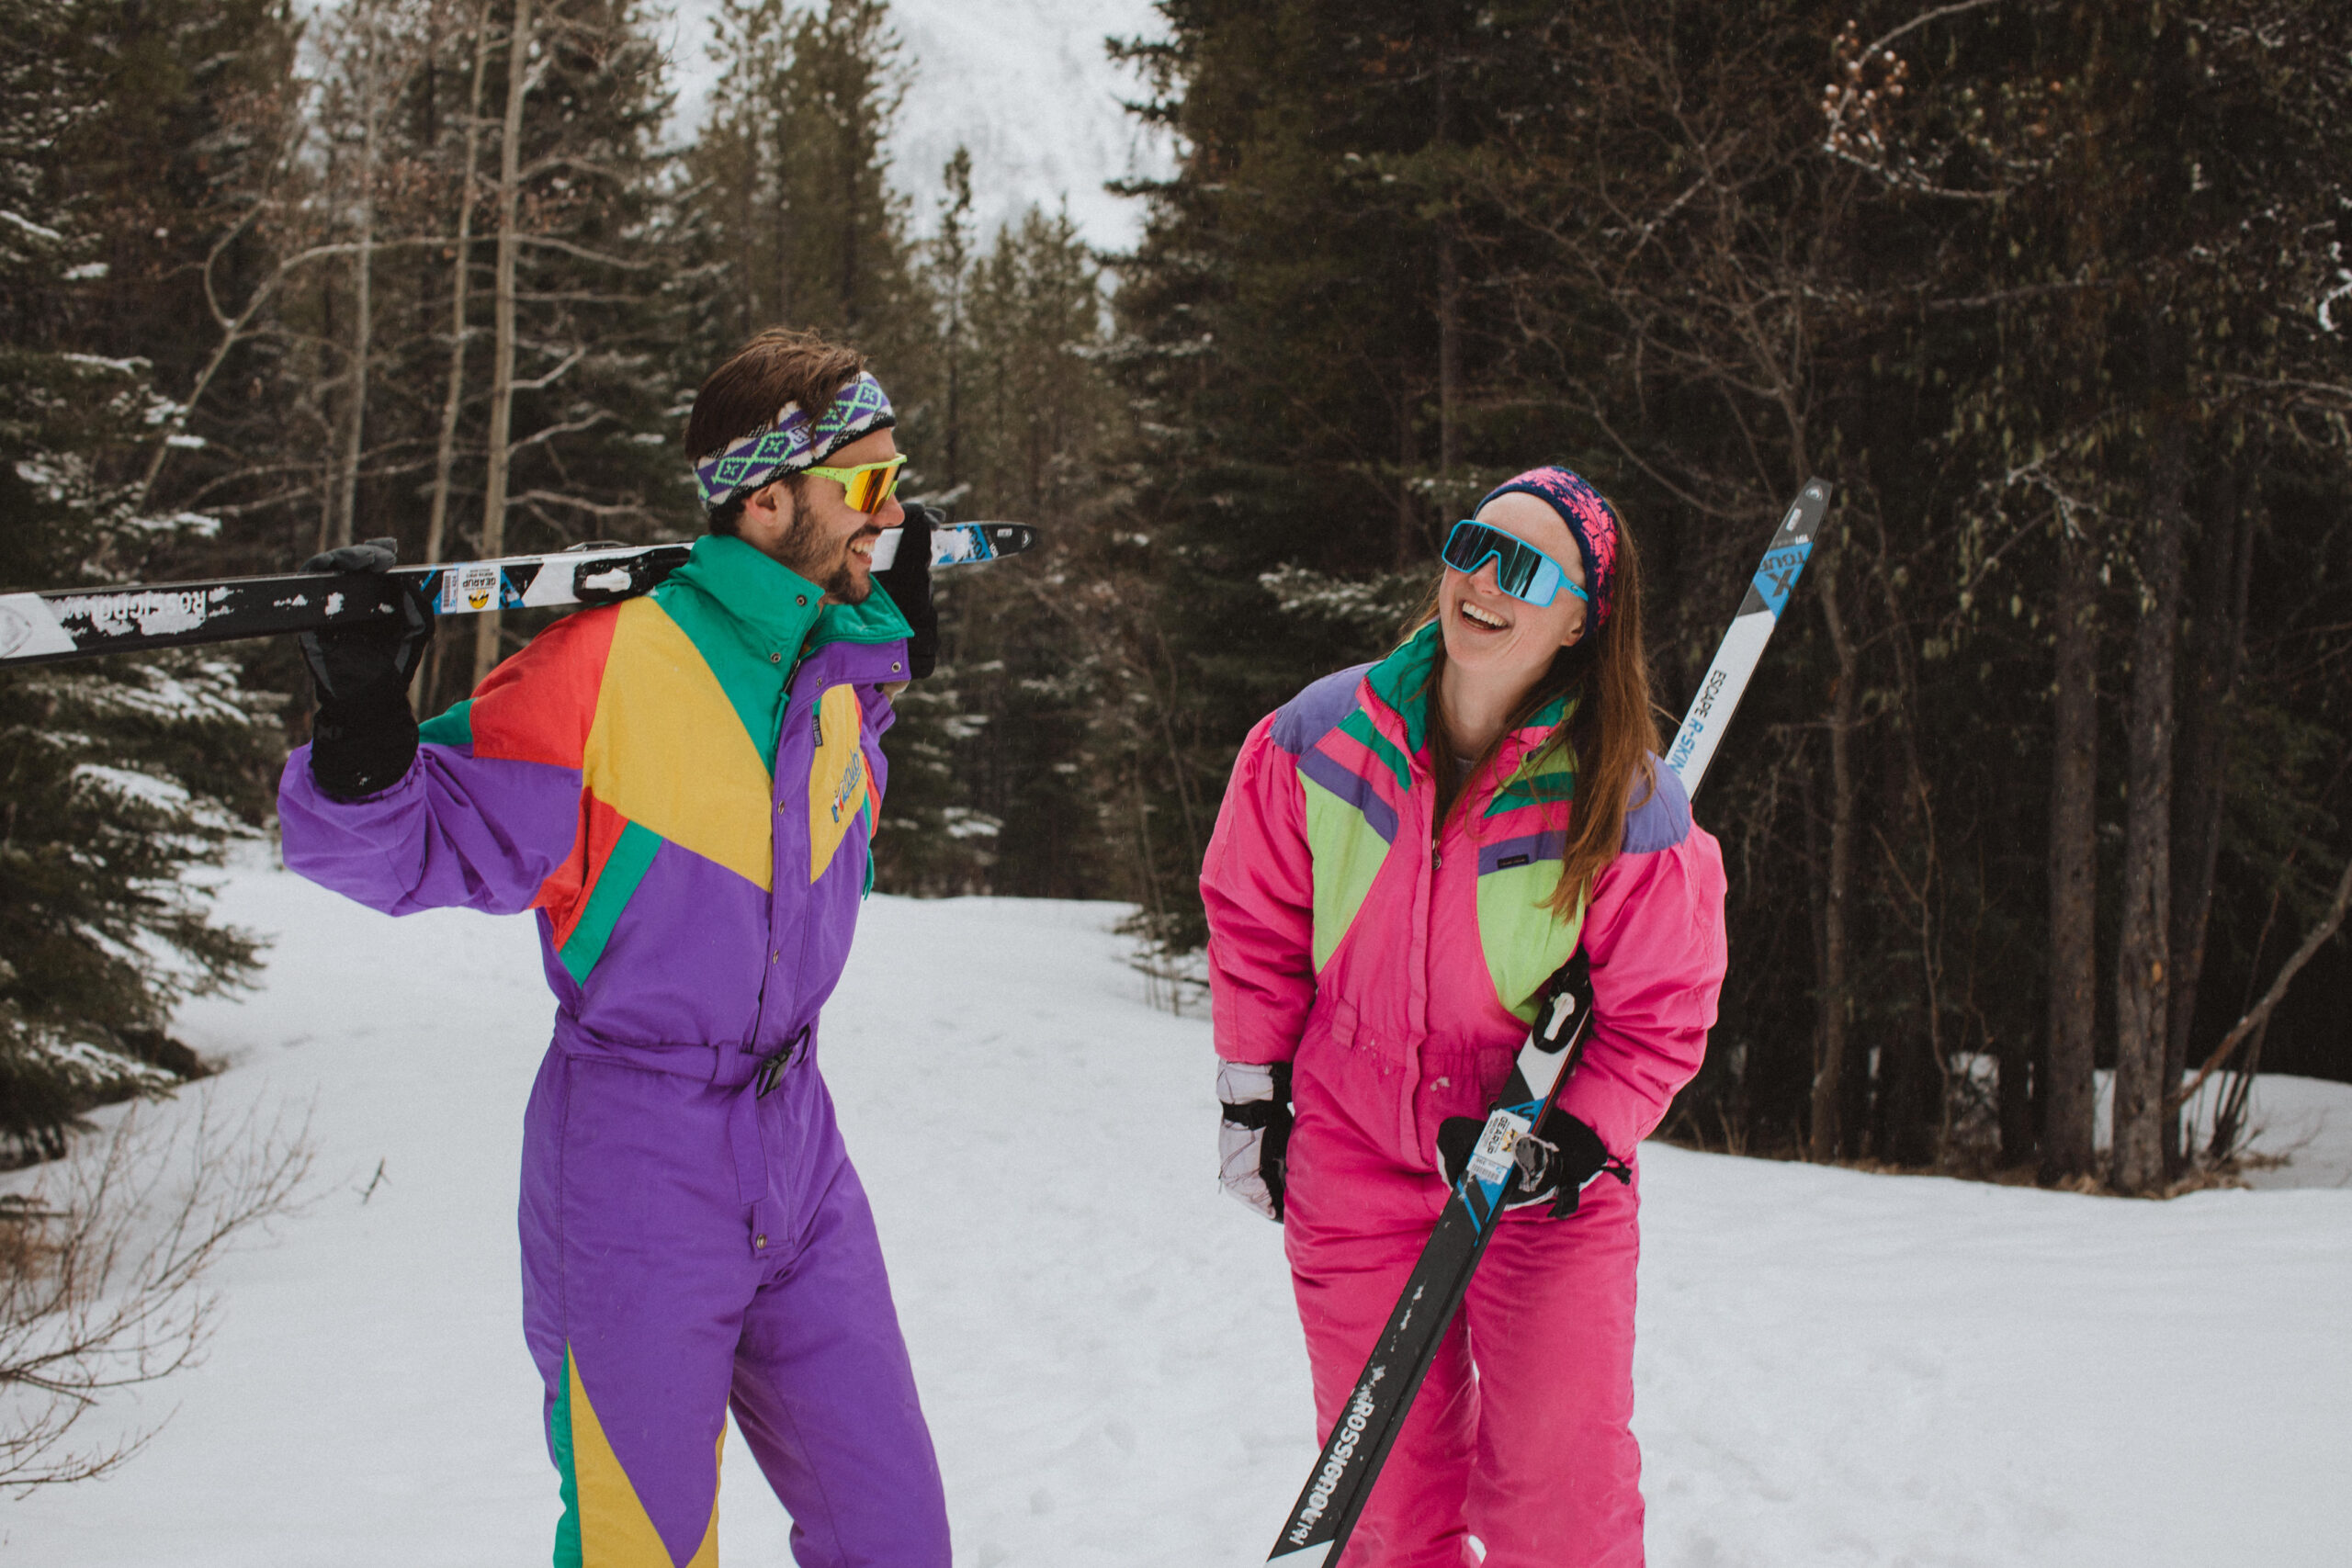 cross-country skiing makes a great activity in Banff during the winter